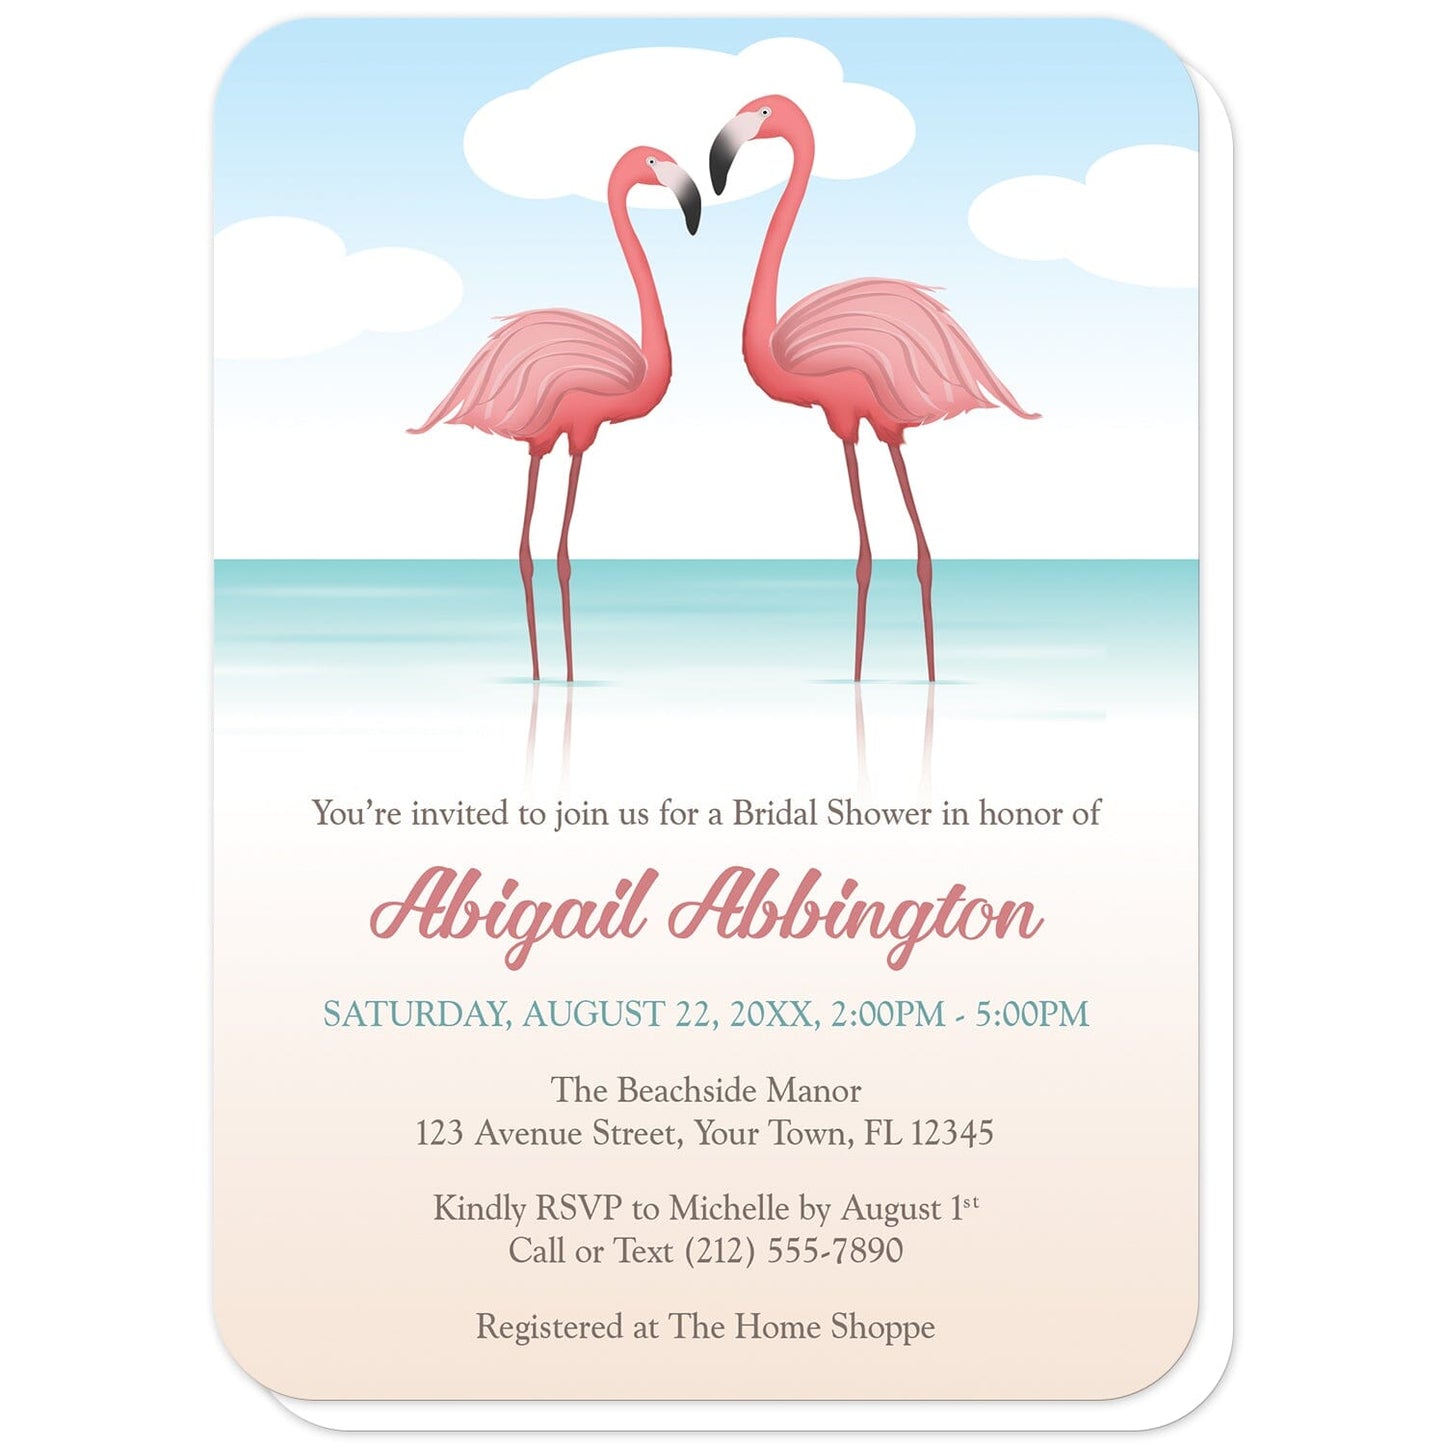 Flamingos in the Water Bridal Shower Invitations (with rounded corners) at Artistically Invited. Flamingos in the water bridal shower invitations with a tropical illustration of two pink flamingos standing in the water. Your personalized bridal shower celebration details are custom printed in pink, teal, and brown over the beach background design below the flamingos.